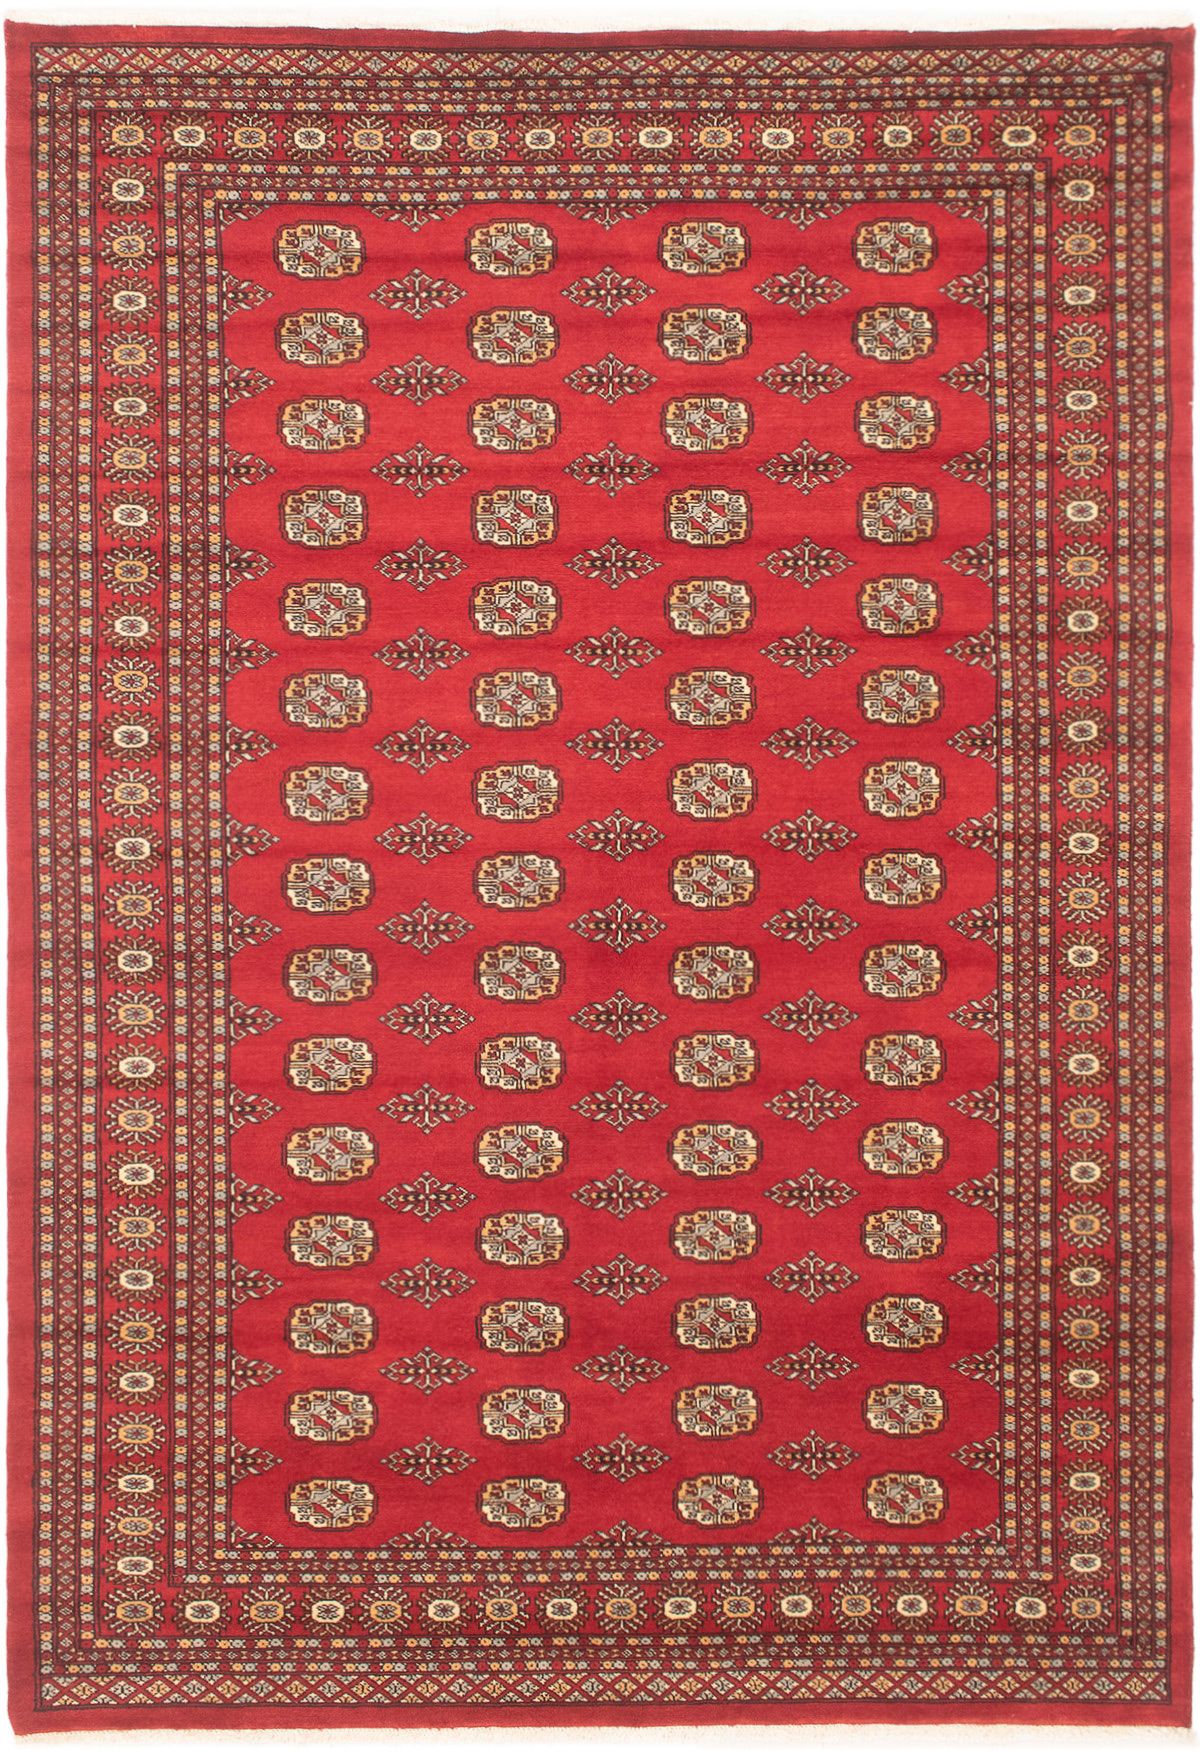 Hand-knotted Finest Peshawar Bokhara Red Wool Rug 6'1" x 8'10"  Size: 6'1" x 8'10"  